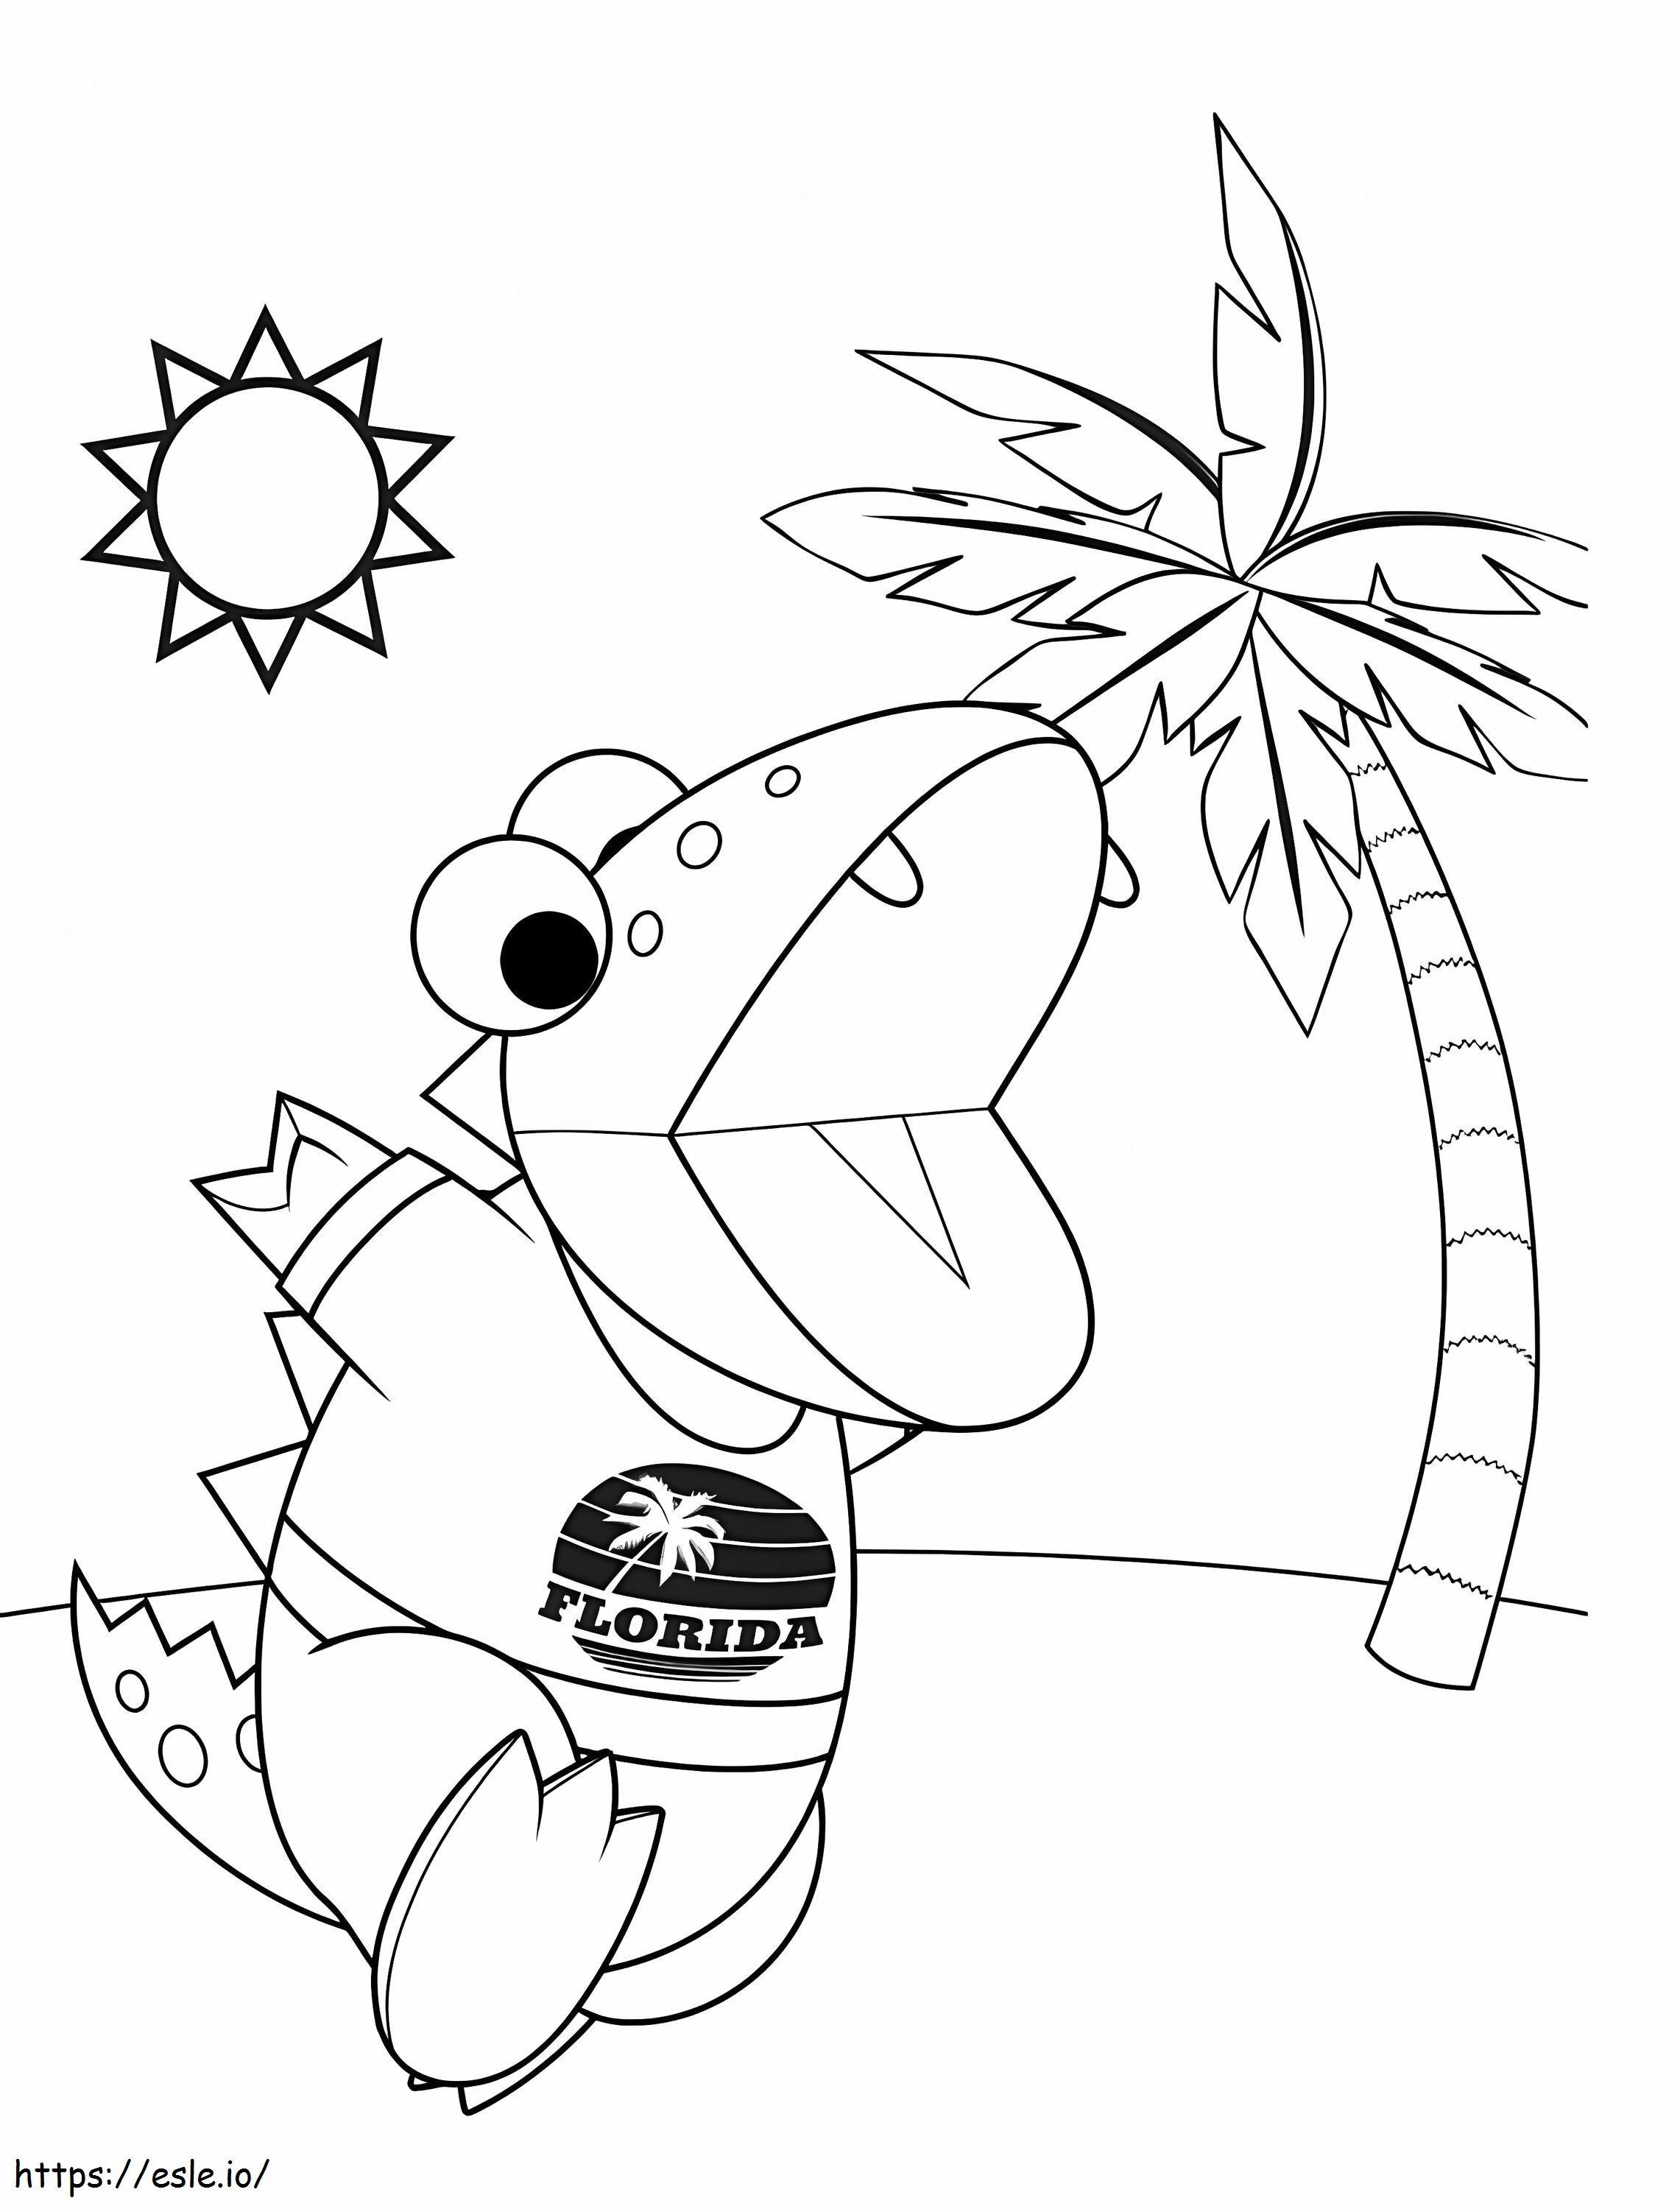 Gus From Ryans World coloring page